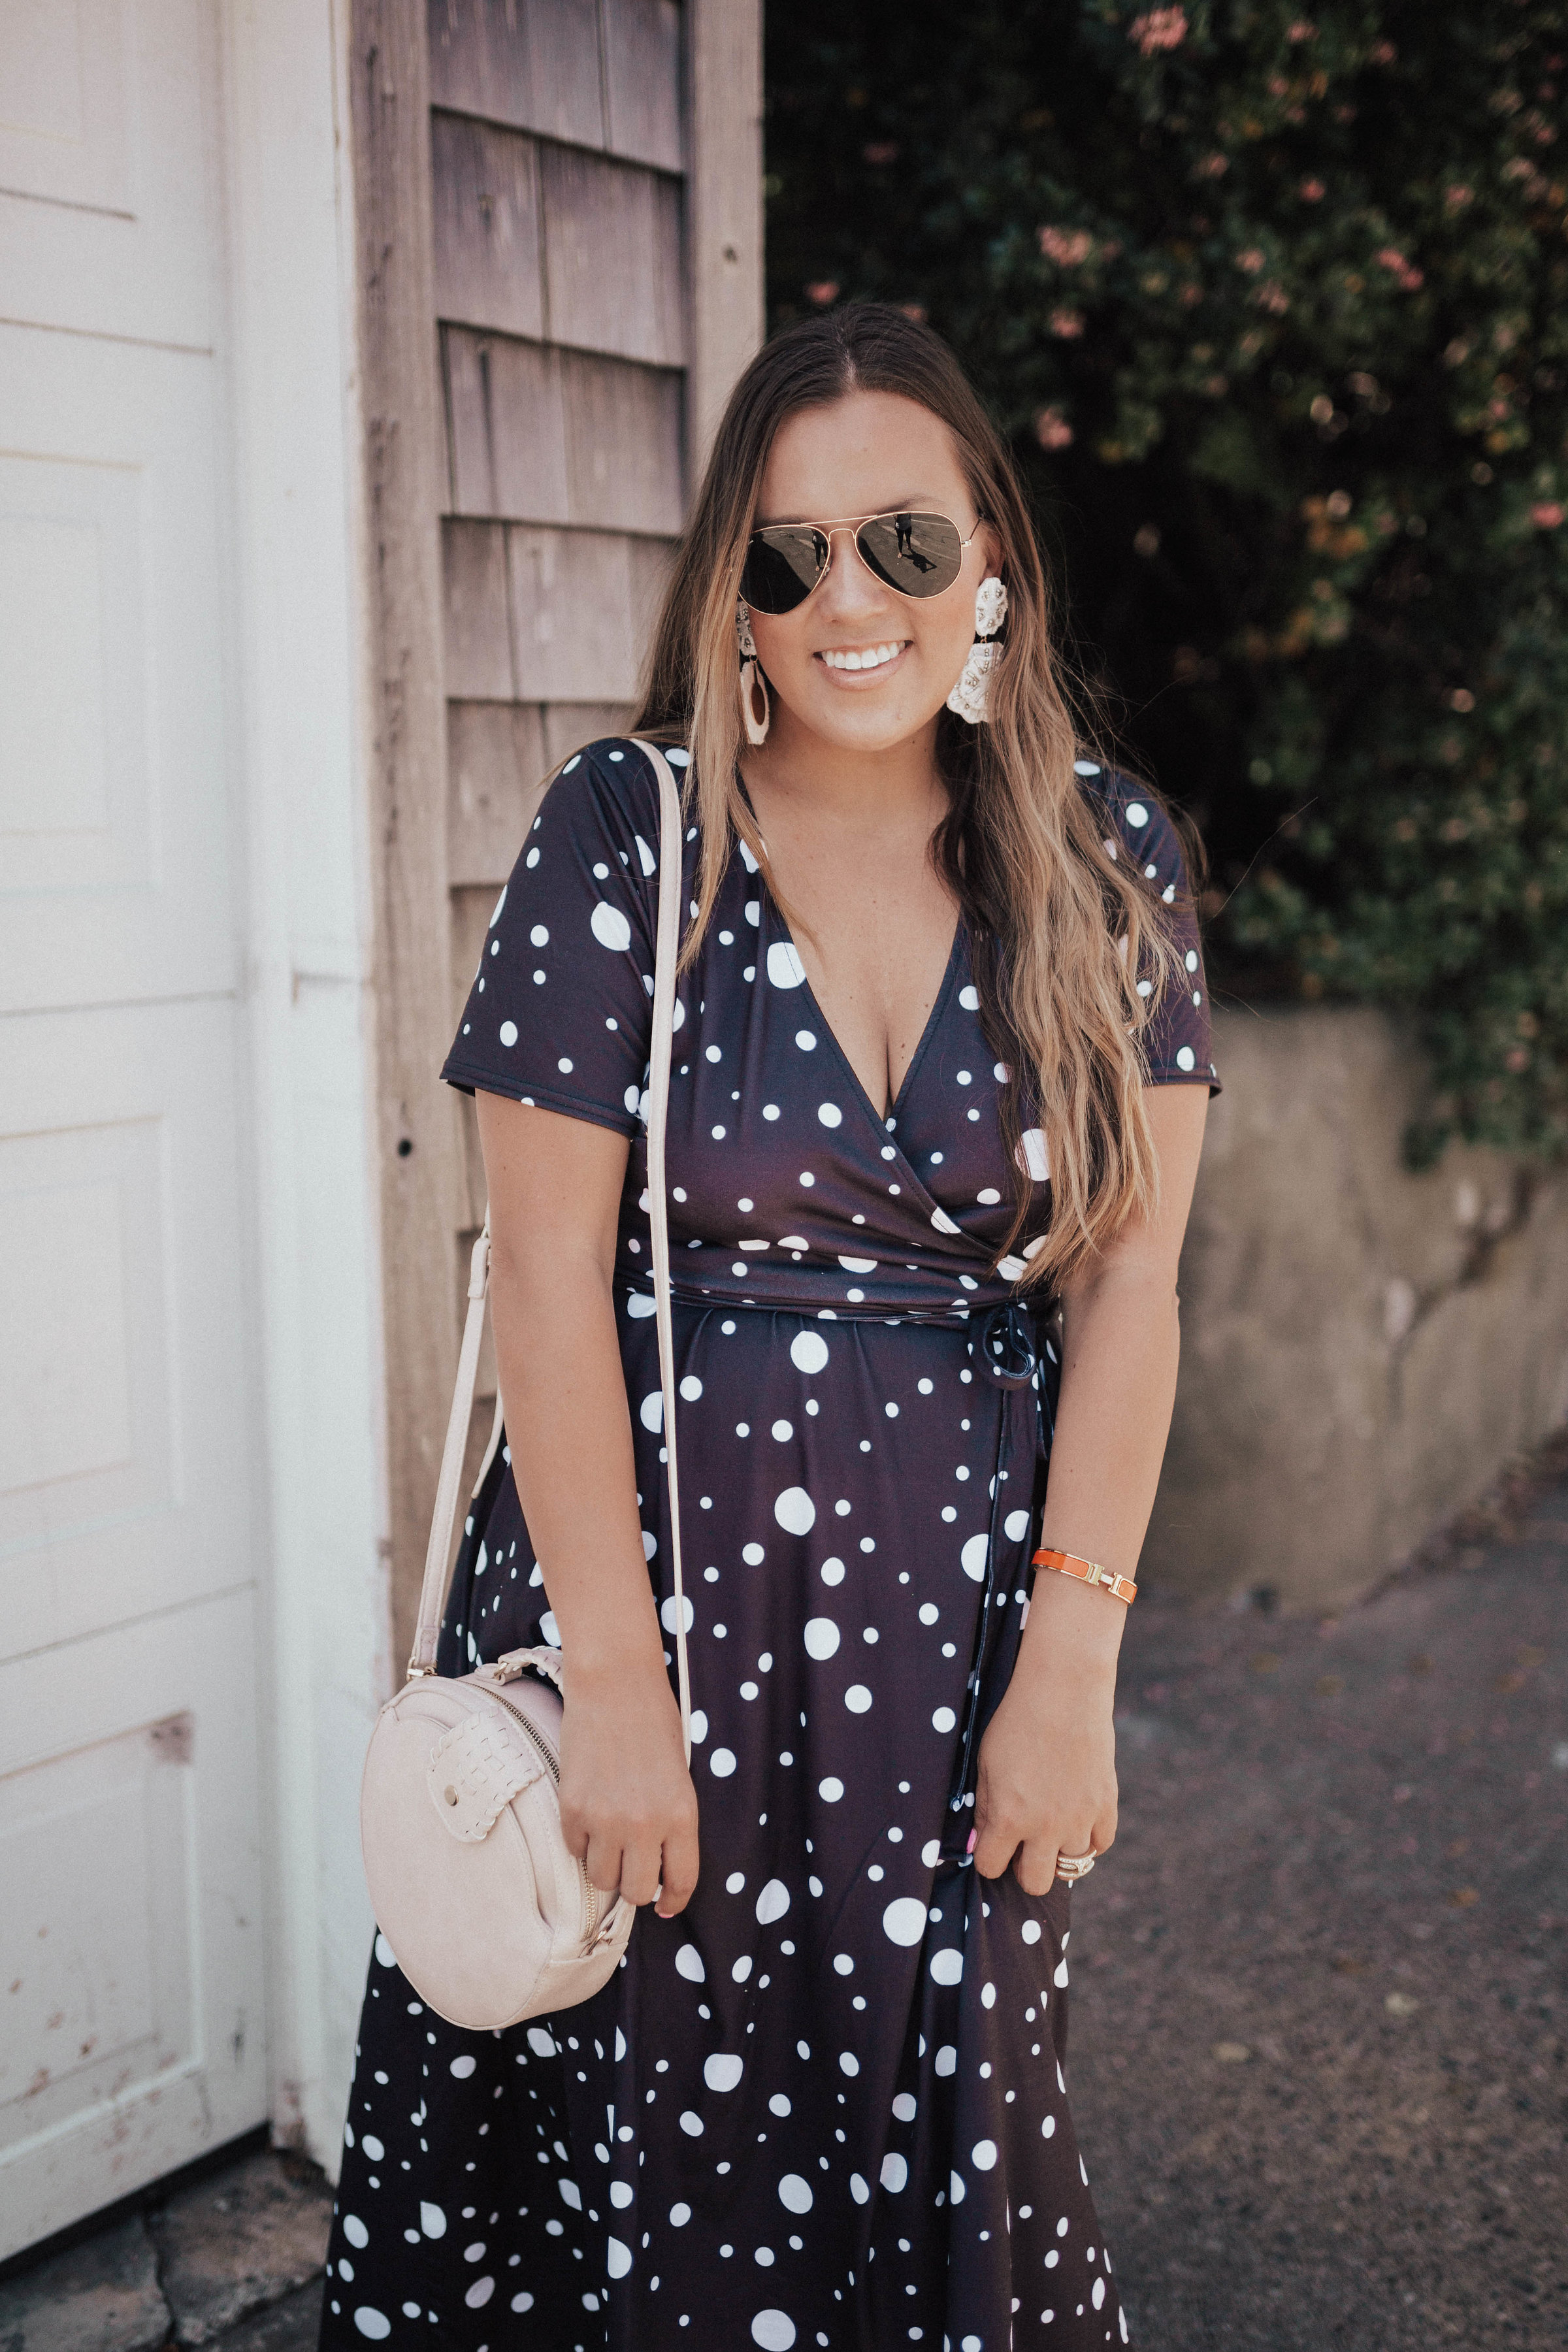 Ashley Zeal from Two Peas in a Prada shares her favorite dresses from her Simply Be Summer Lookbook. Simply Be is a size inclusive brand that ranges from 8-28.